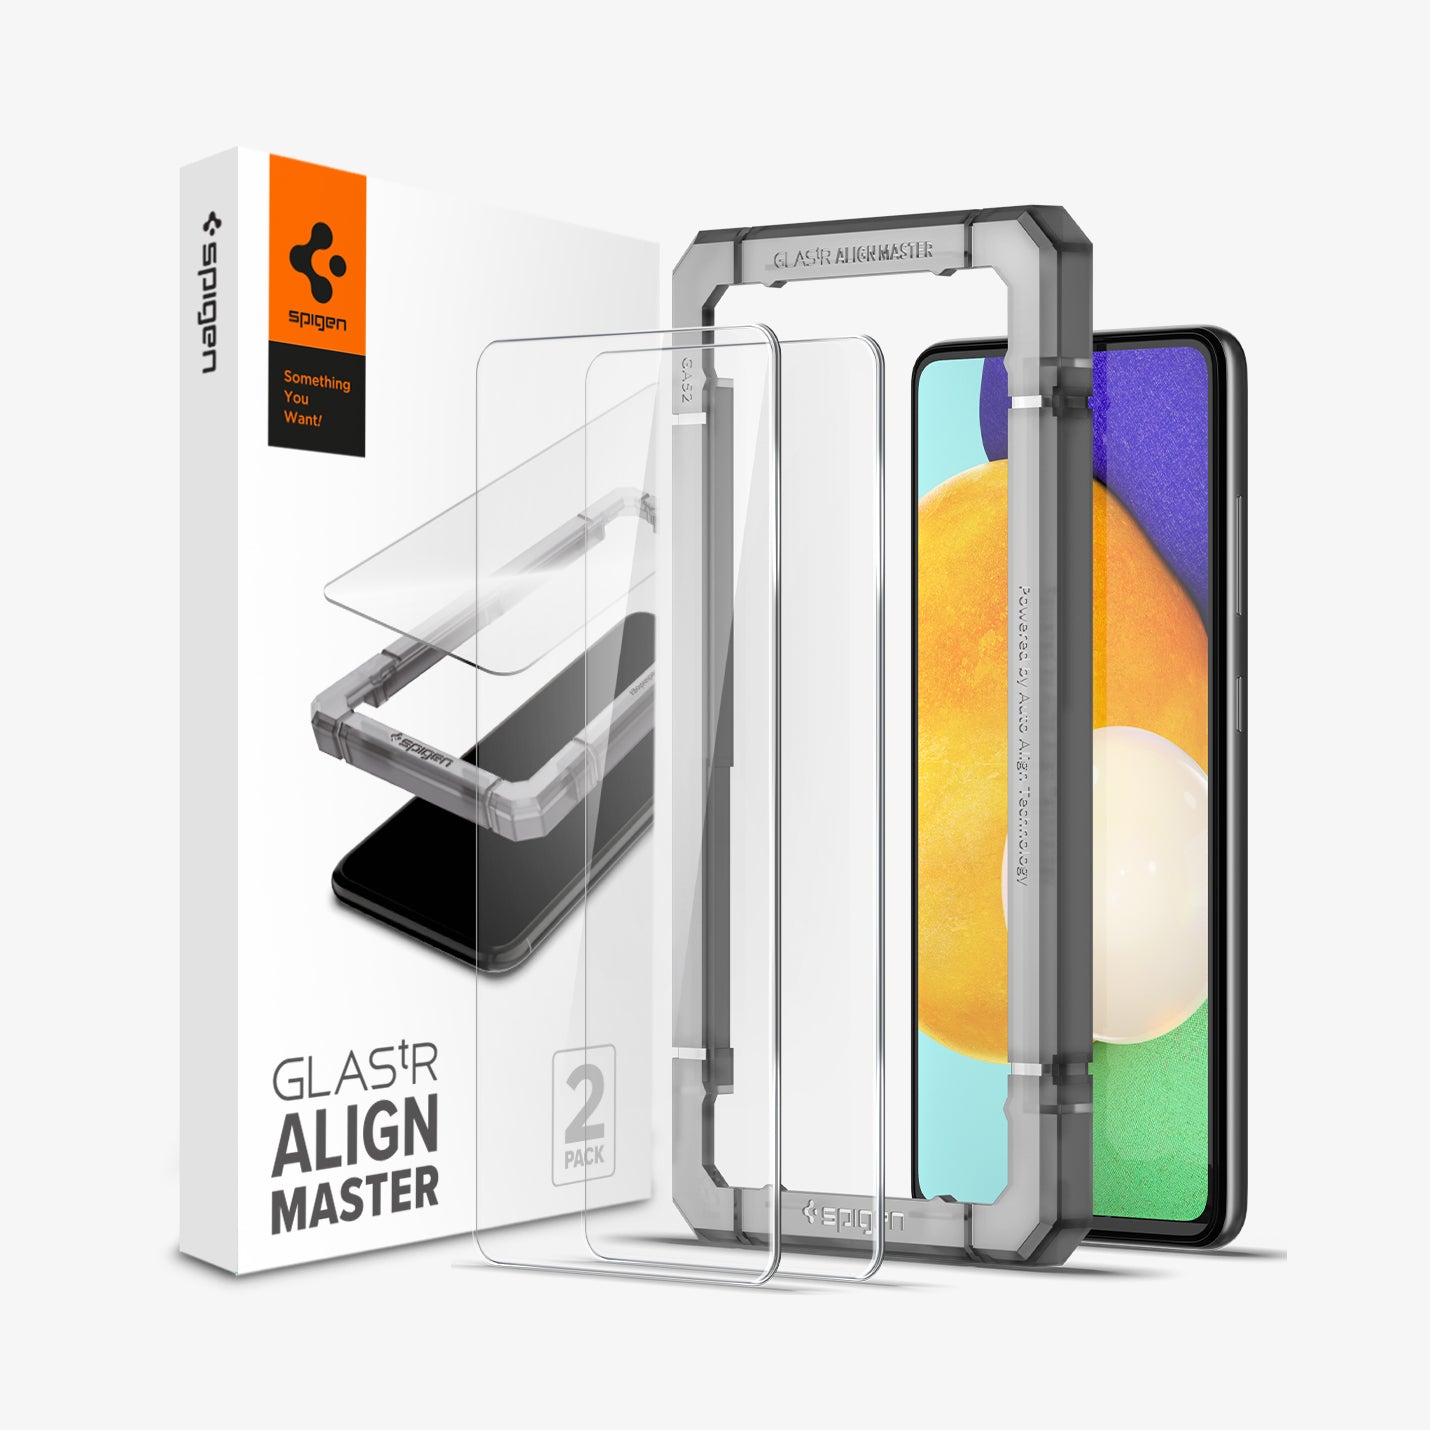 AGL02821 - Galaxy A52 Alignmaster Full Cover showing the 2 glass screen protector aligned with an installation tray and a device beside it, is a packaging